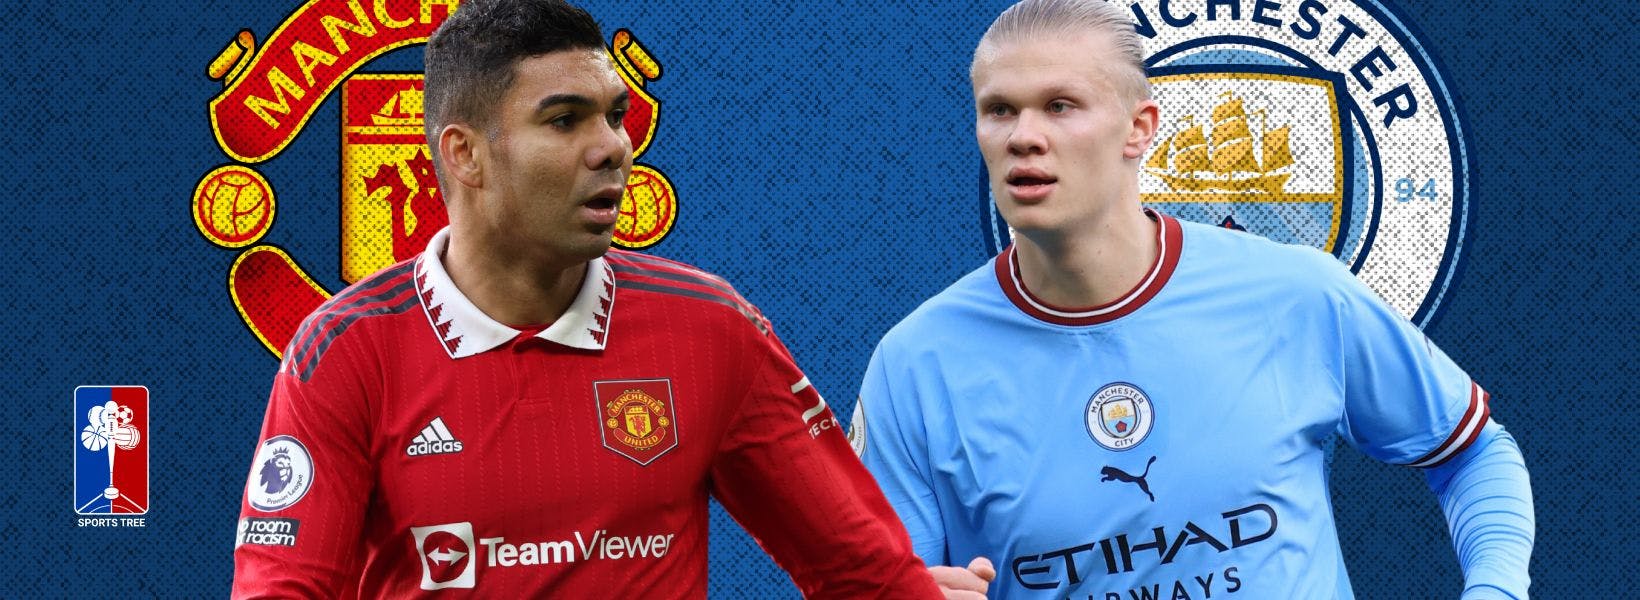 Manchester United and Manchester City stars Carlos Casemiro and Erling Haaland